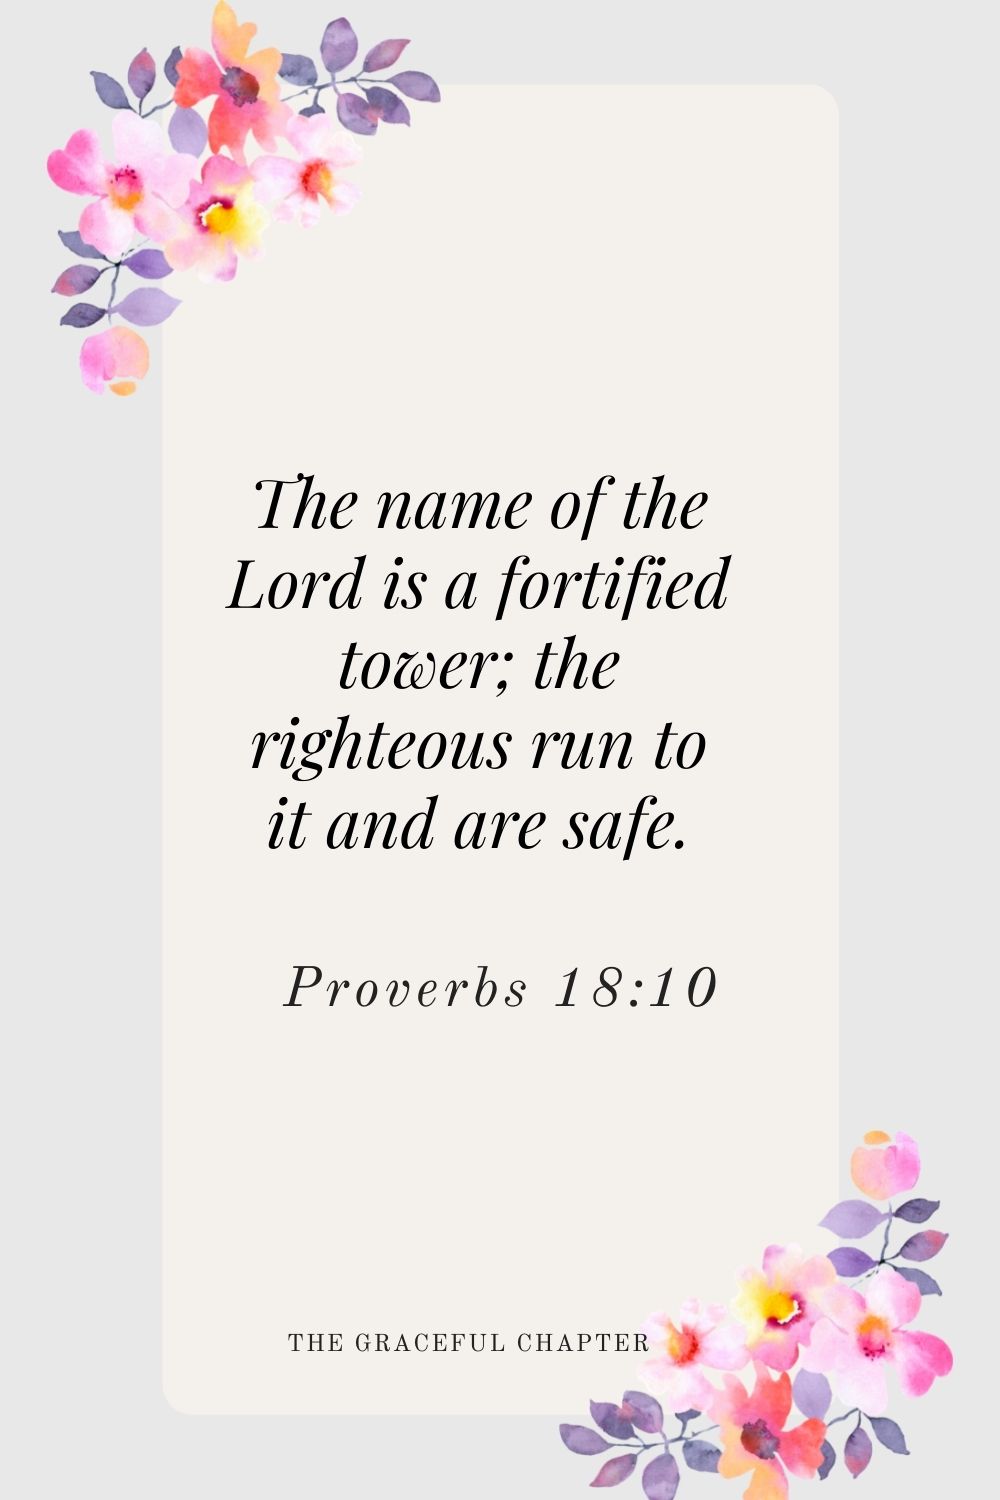 The name of the Lord is a fortified tower; the righteous run to it and are safe. Proverbs 18:10